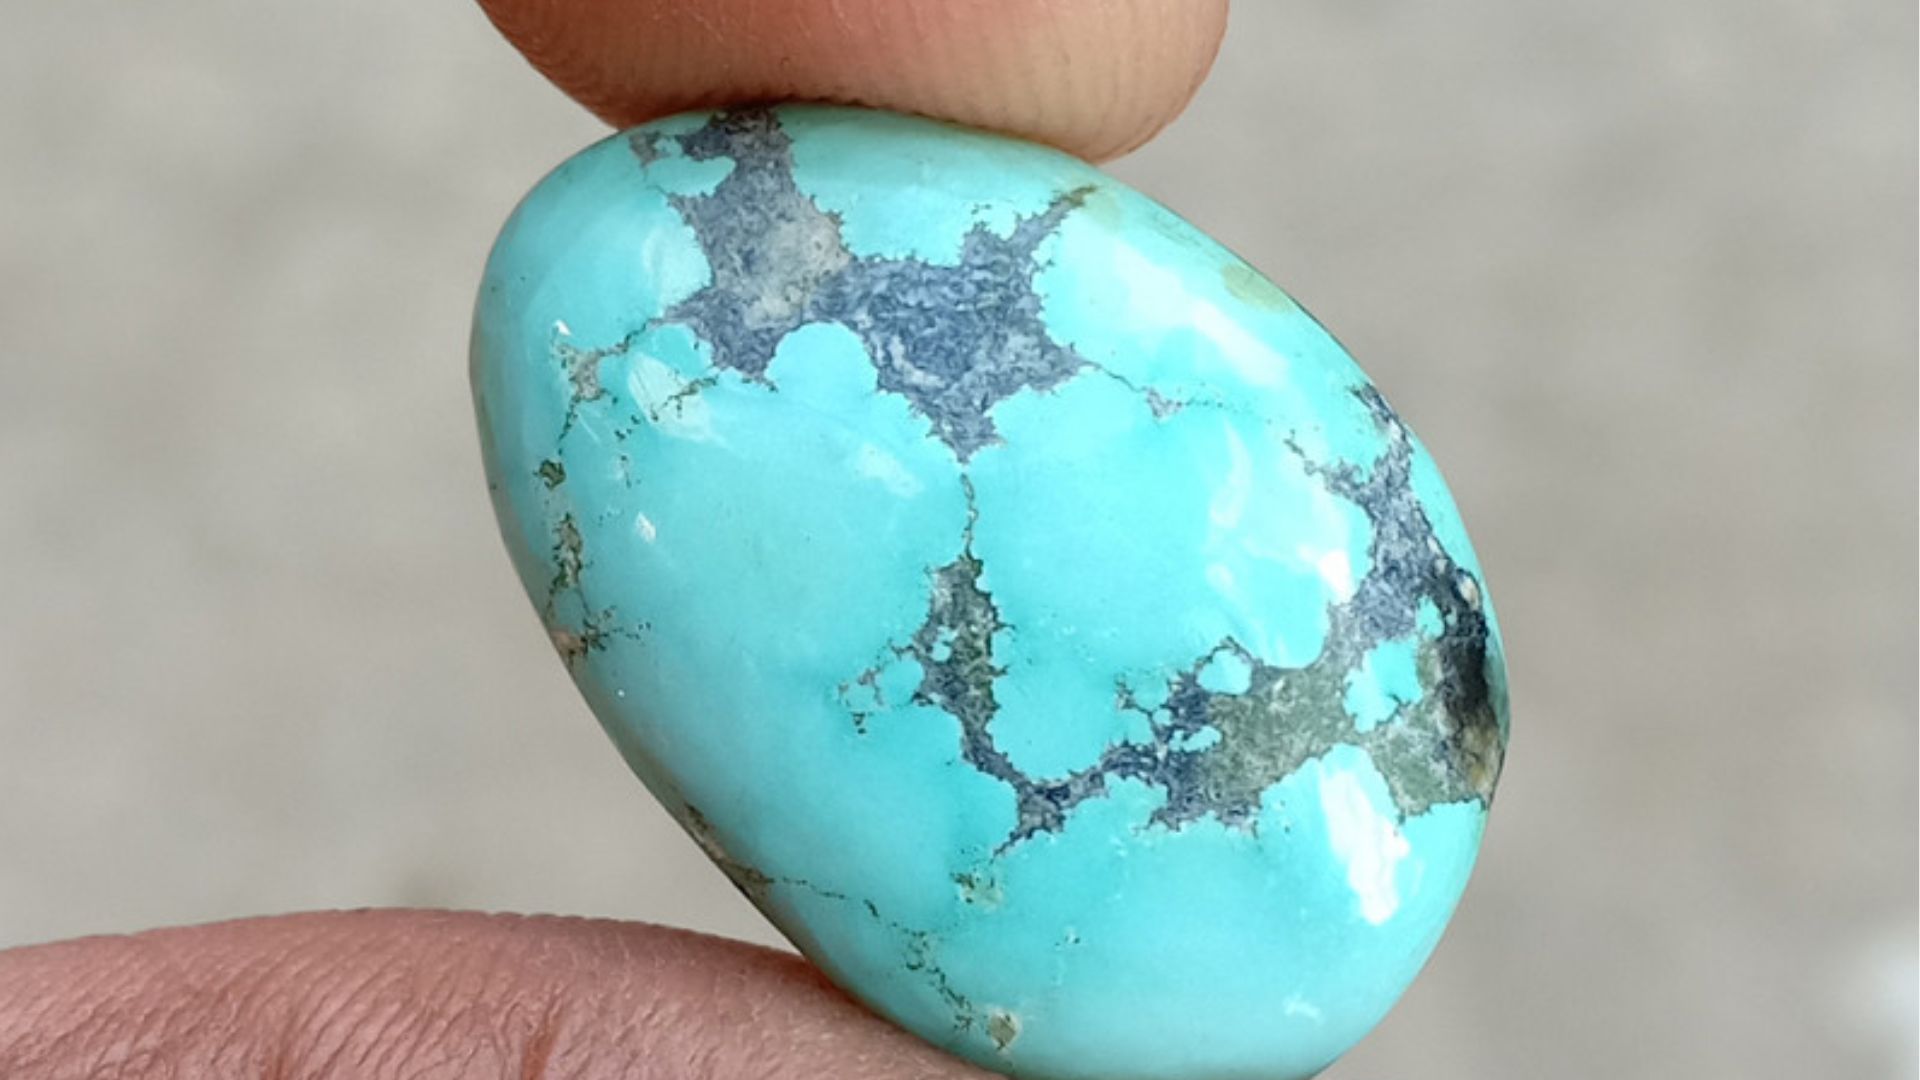 Turquoise Meaning And Uses - A Fascinating Gemstone With Ancient Origins